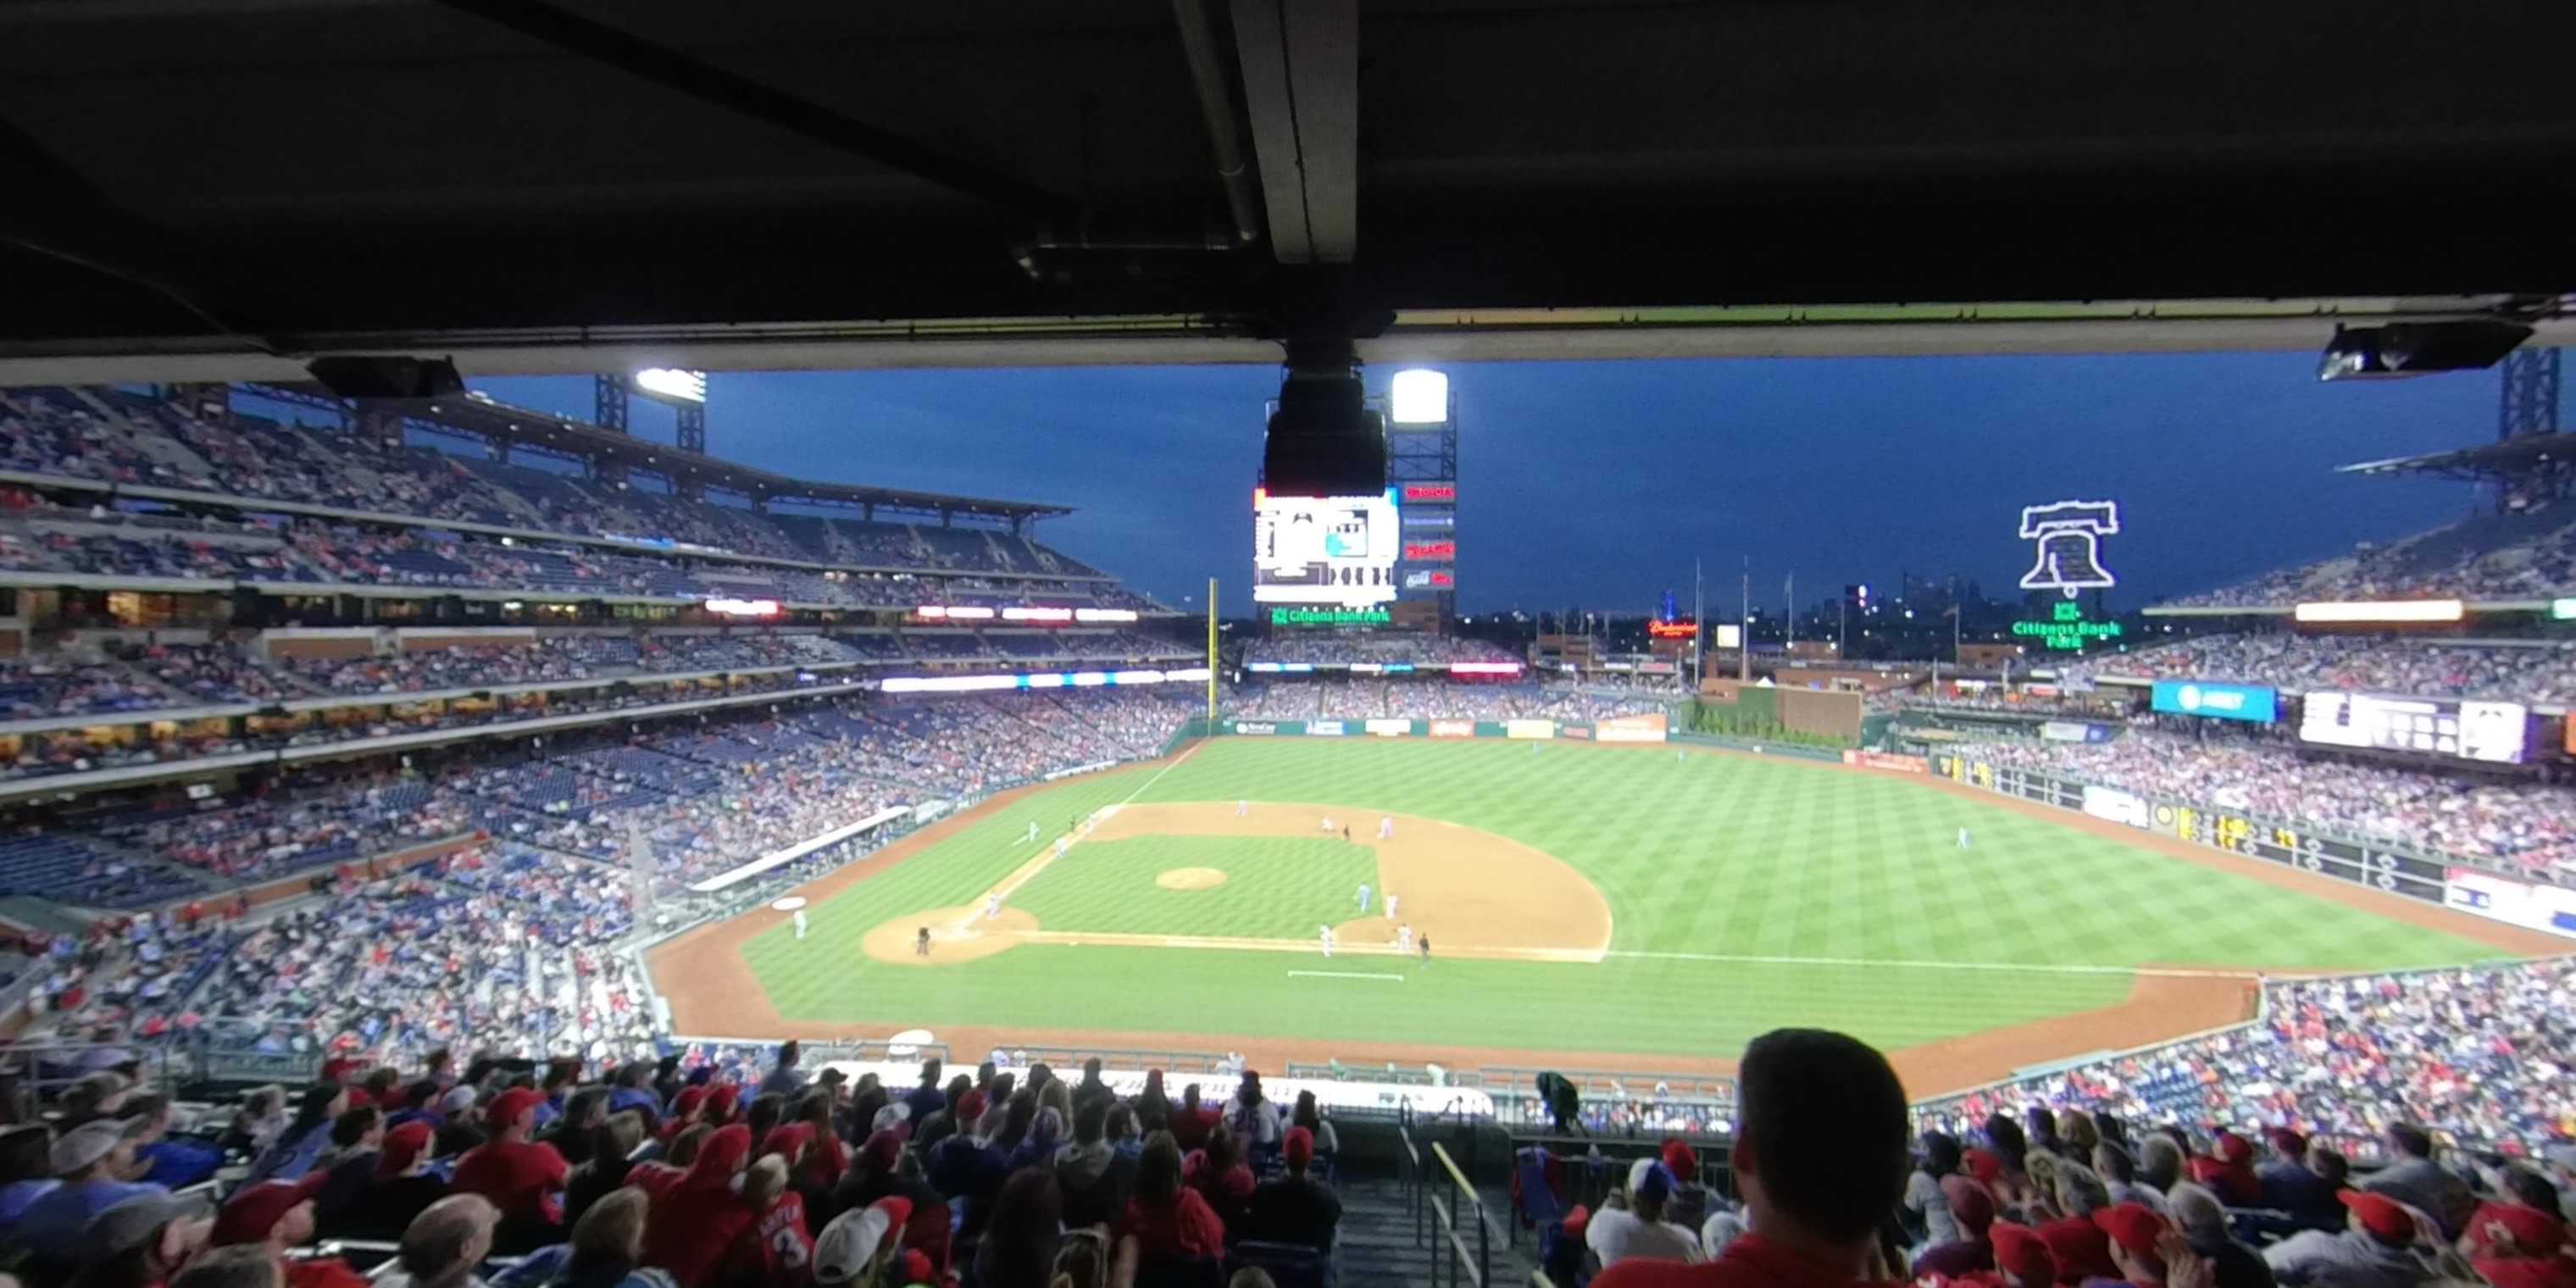 section 215 panoramic seat view  for baseball - citizens bank park